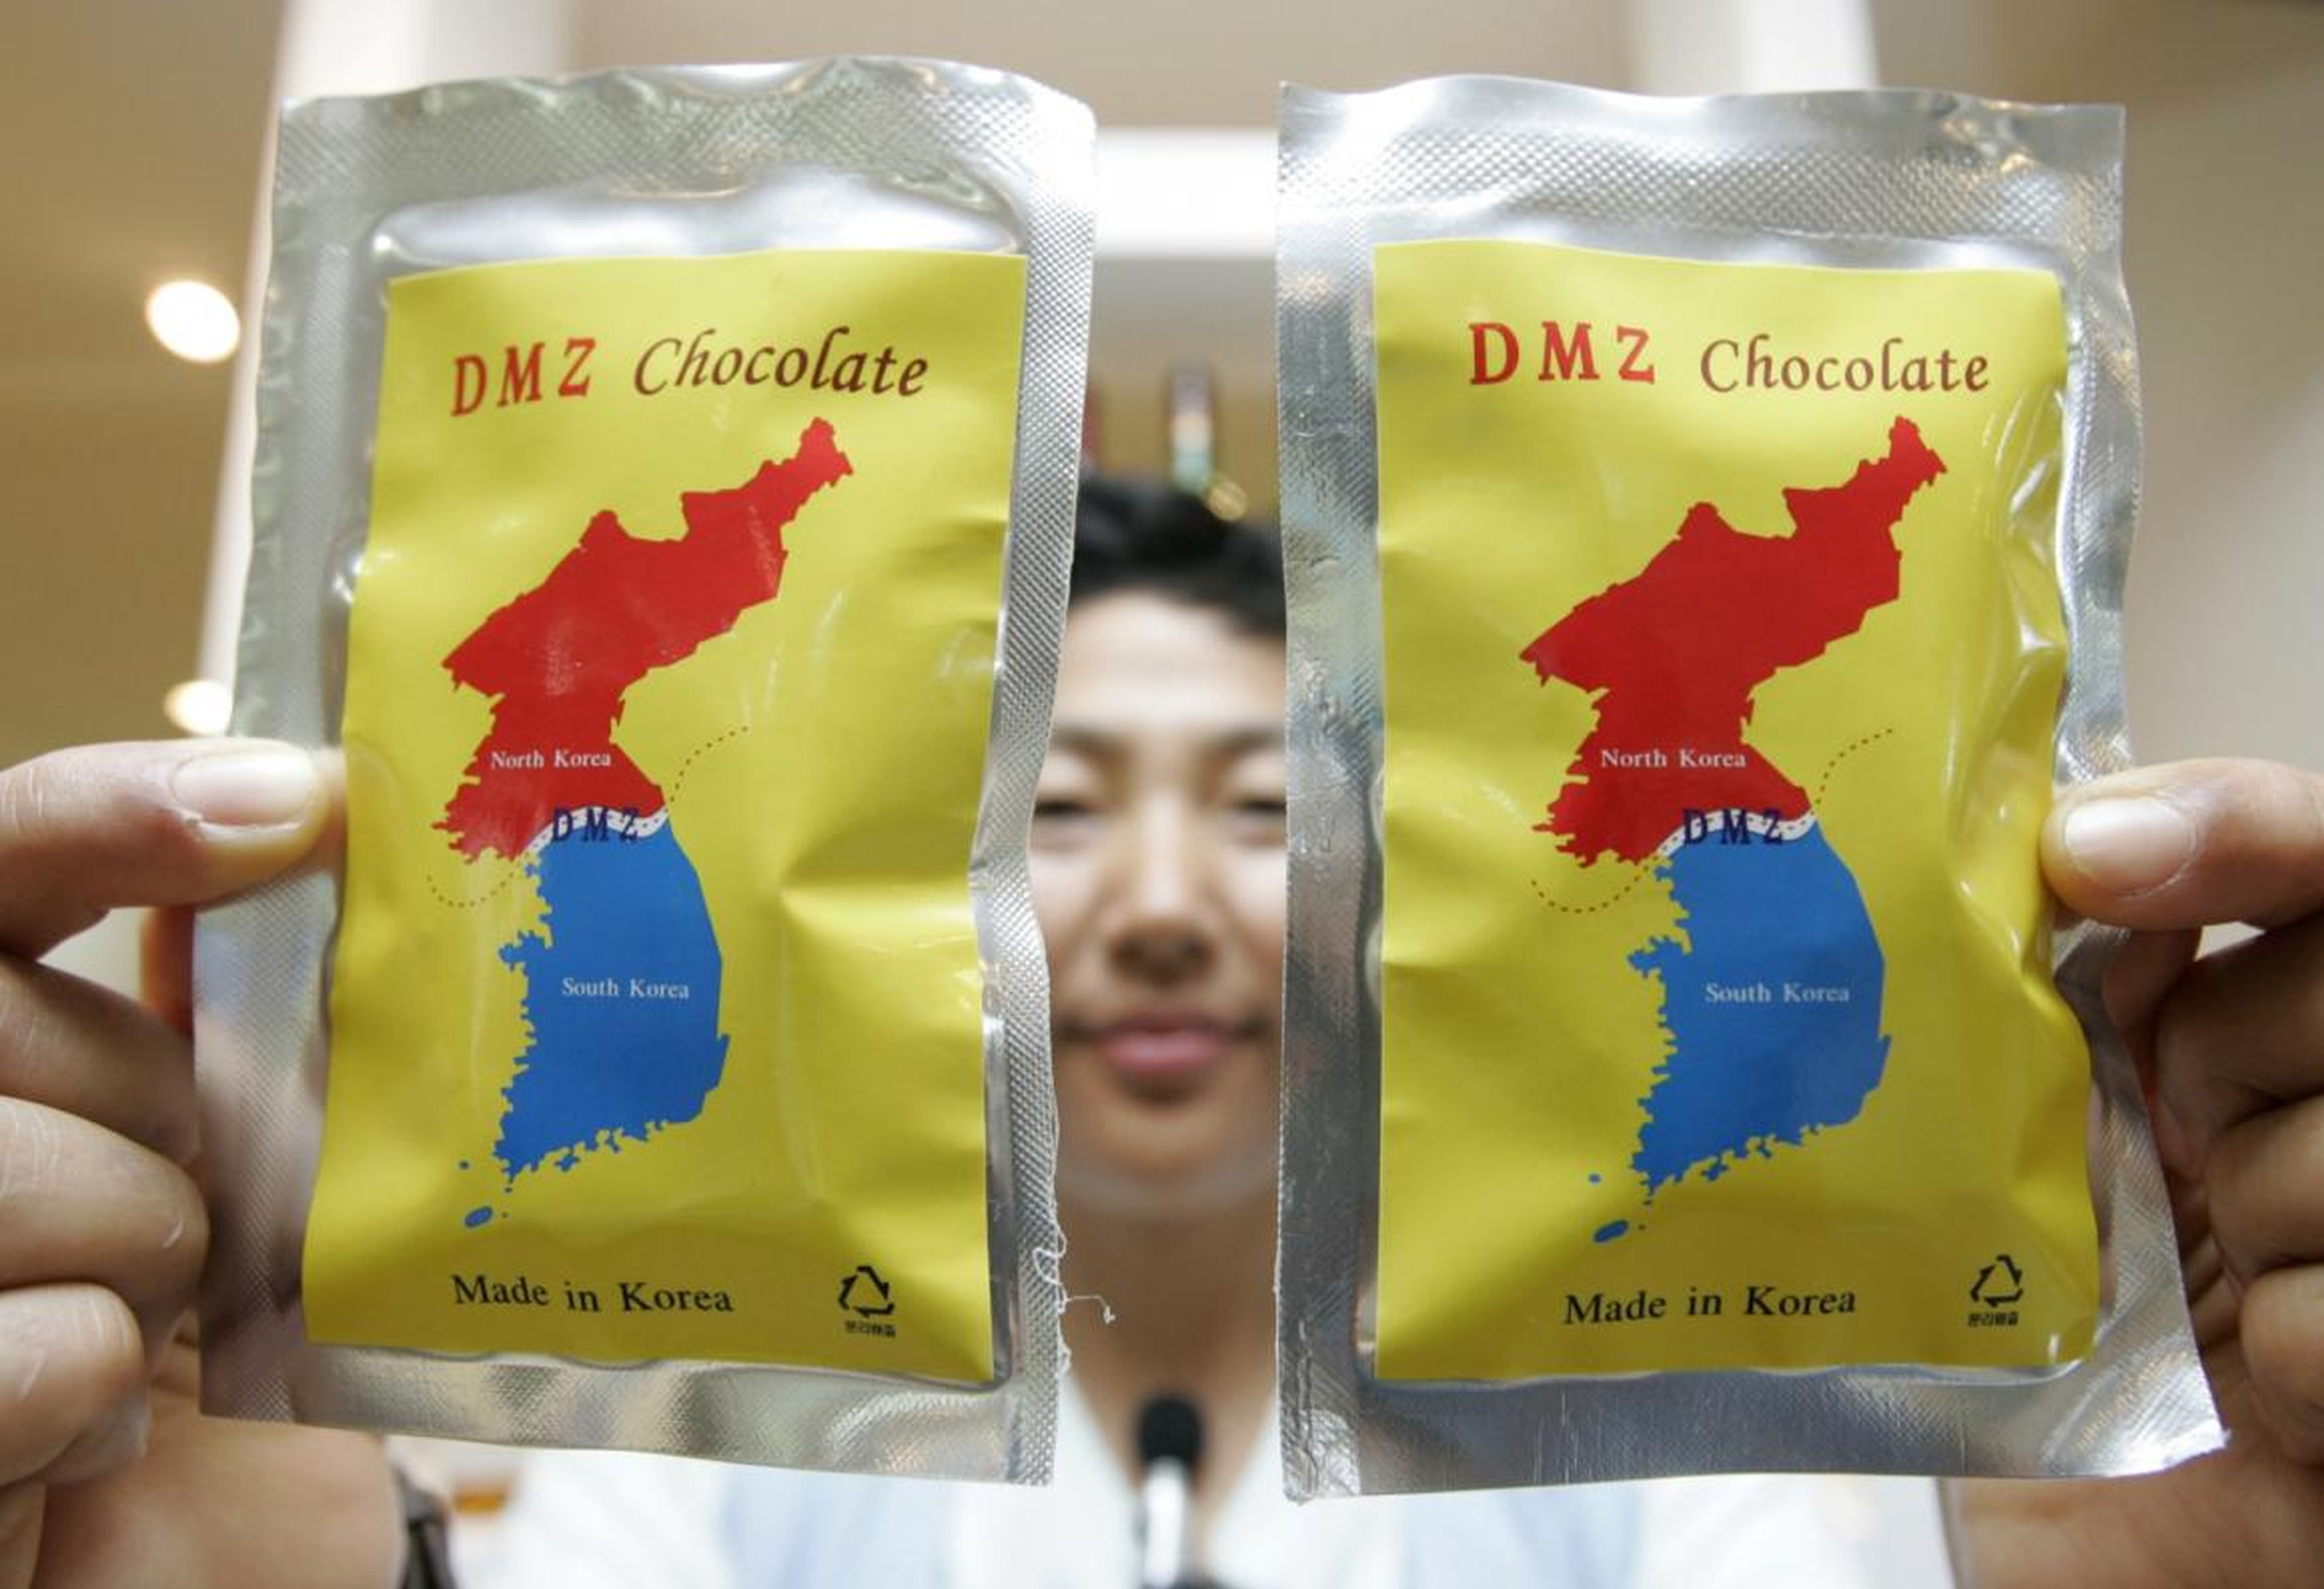 It feels really strange. What struck me was how commercialized the DMZ felt, from the variety of North Korean products you could buy to the '80s-action-movie-style video about the border they screen to the cartoon soldier statues